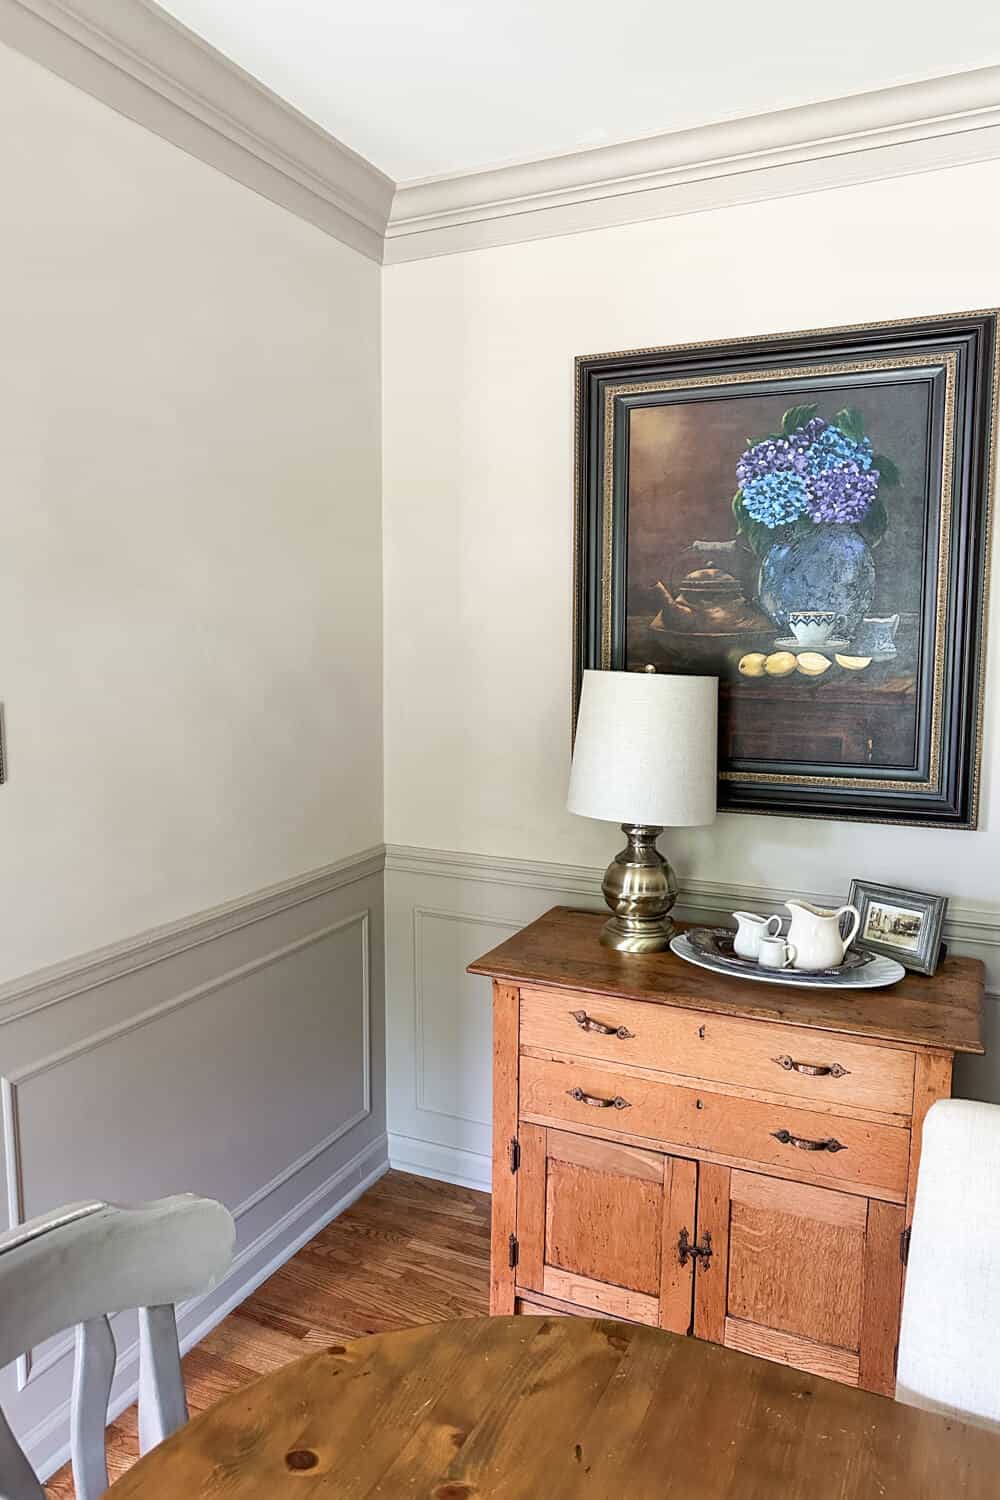 oil painting with hydrangeas hanging on a limewashed wall in a dining room